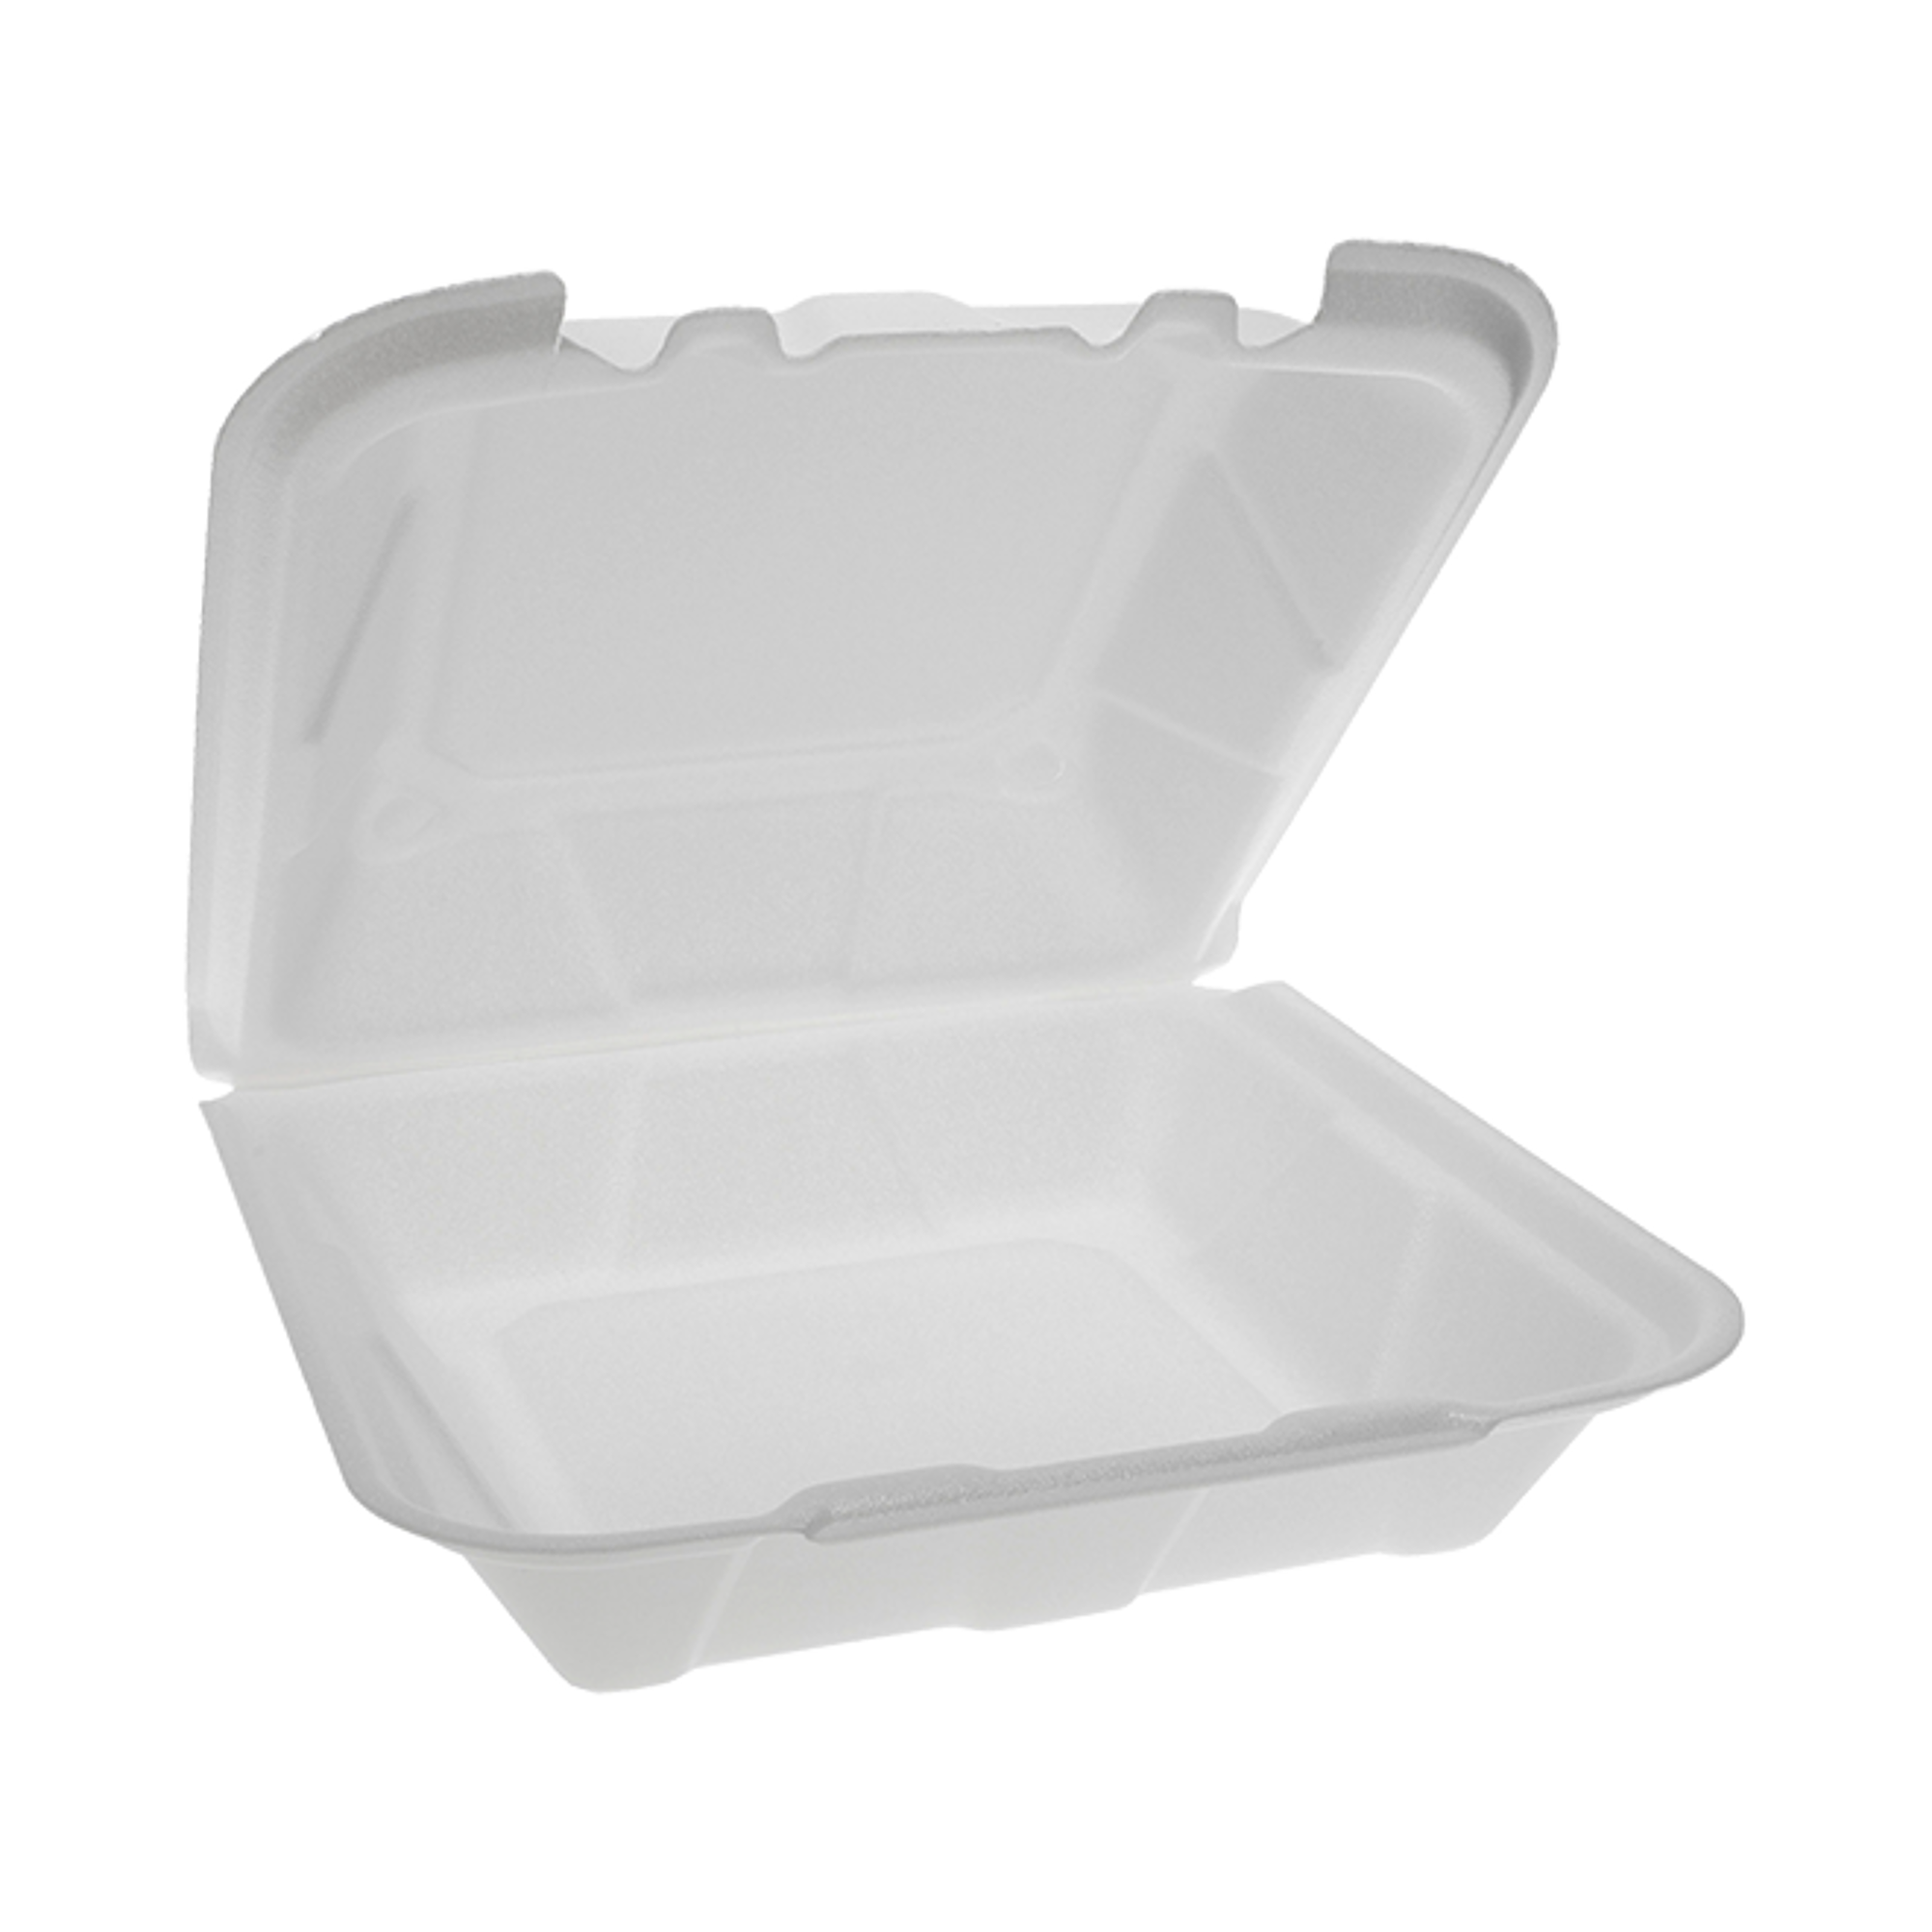 Pactiv Foam Lid Containers 8.42x8.15x3 3-compartment Ytd18803econ : Target